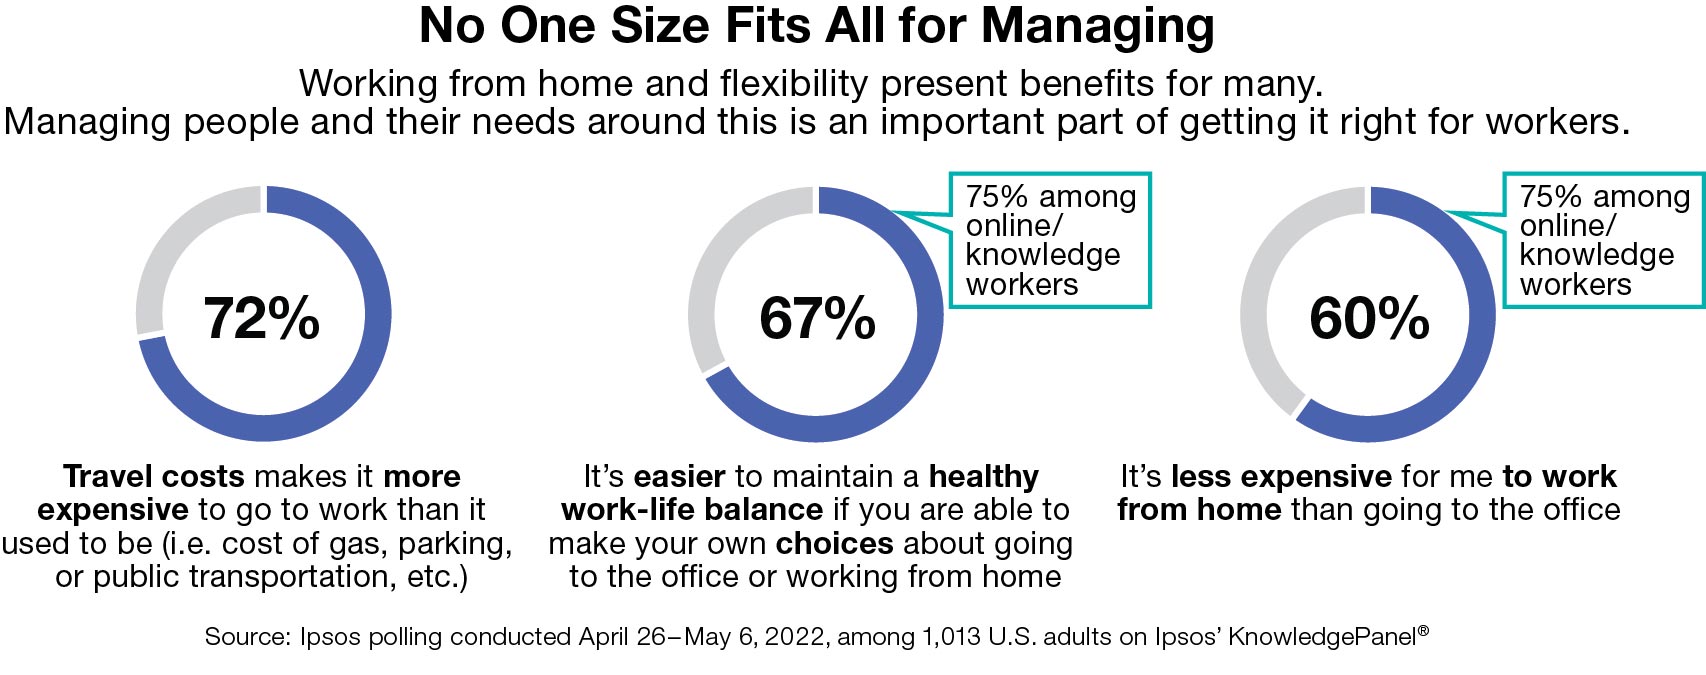 No one size fits all for managing